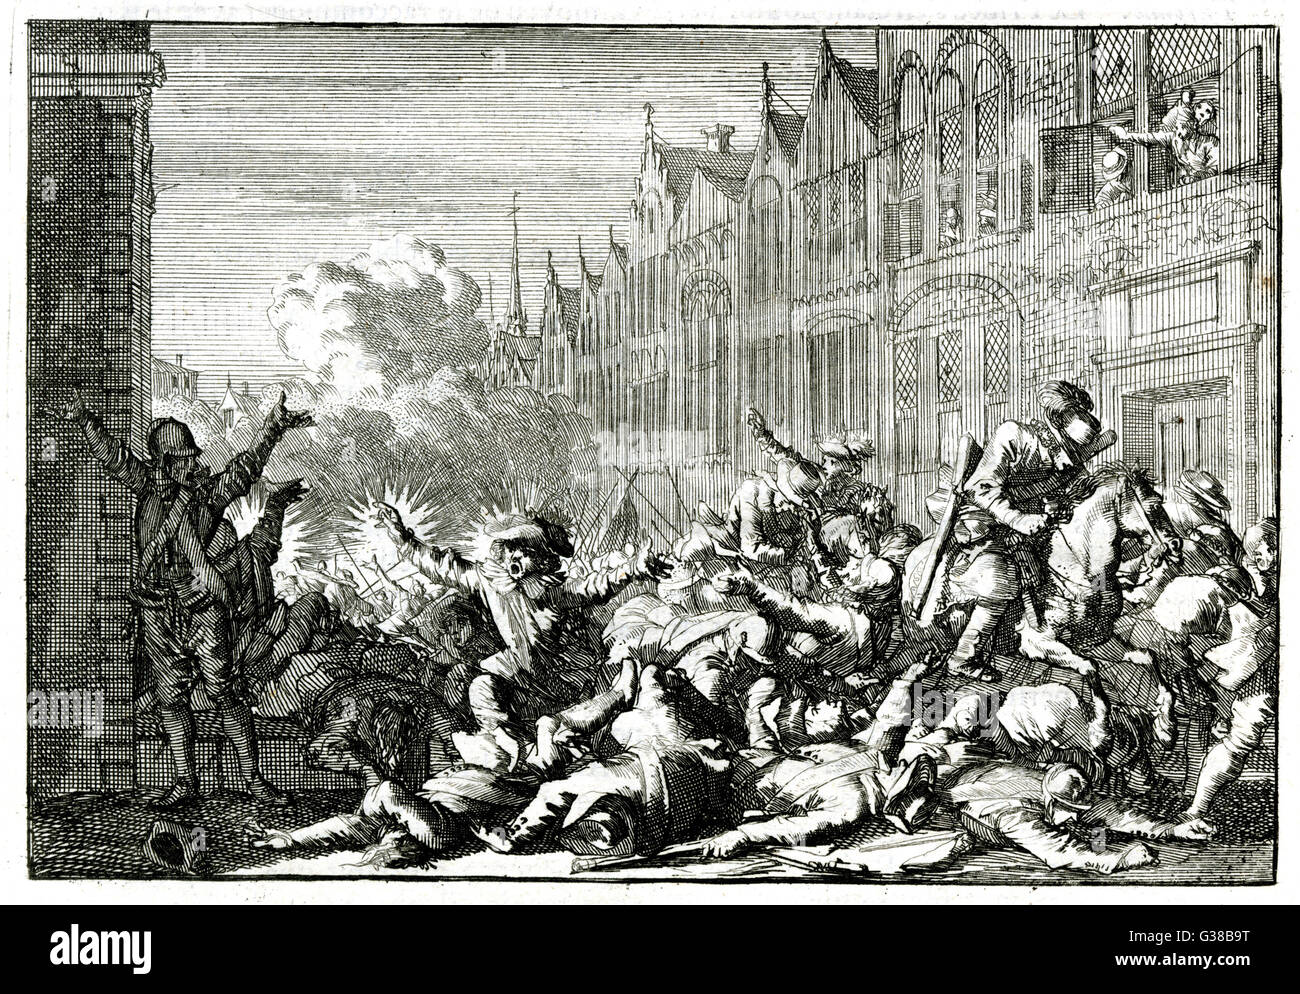 Fronde: Battle of the Faubourg St Antoine occurred on 2 July 1652 in Paris